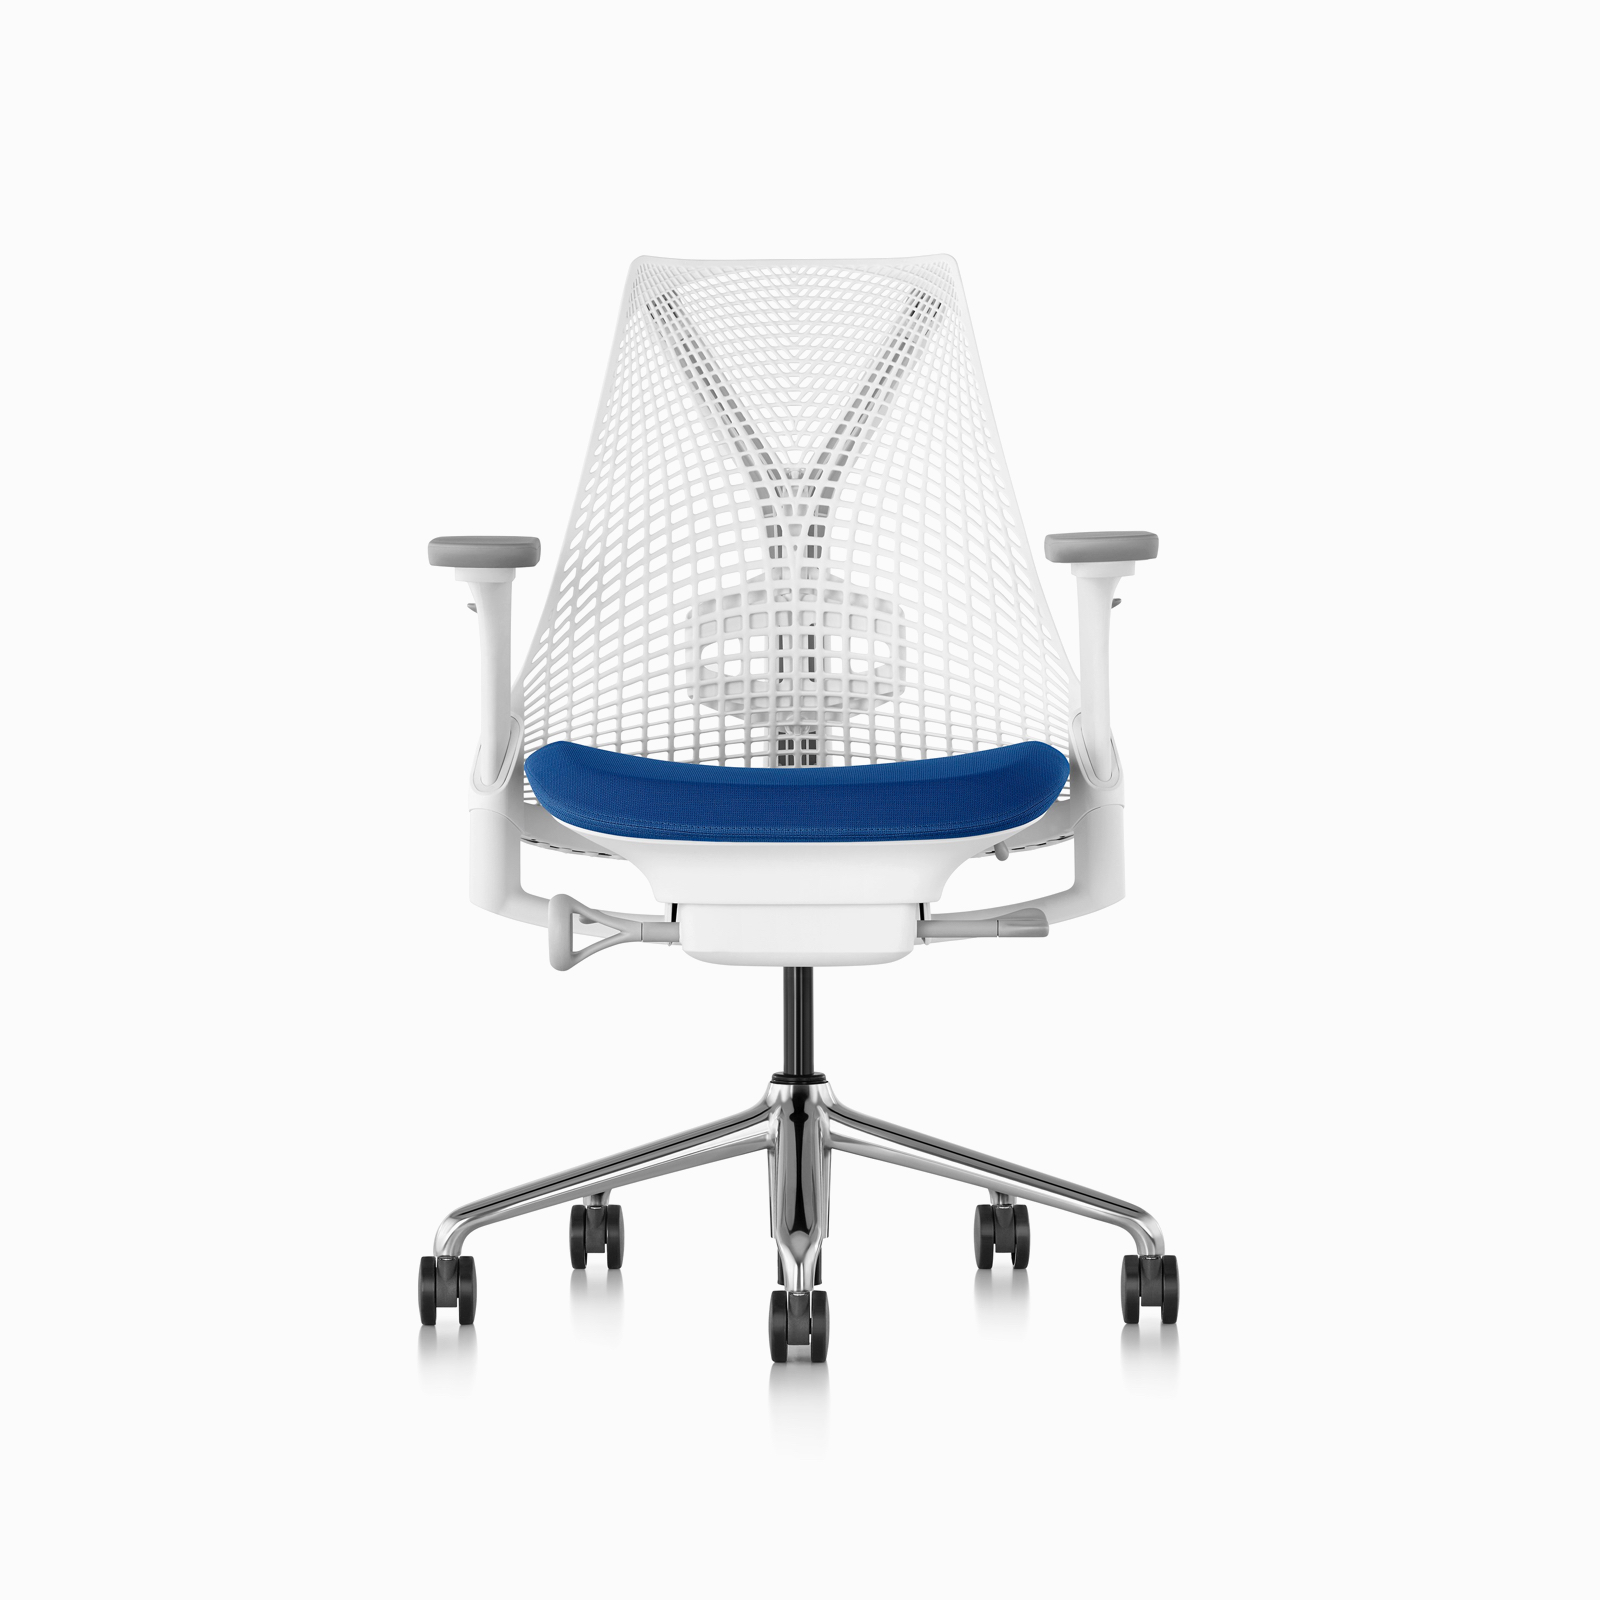 A Sayl Chair in white and blue, viewed from the front.